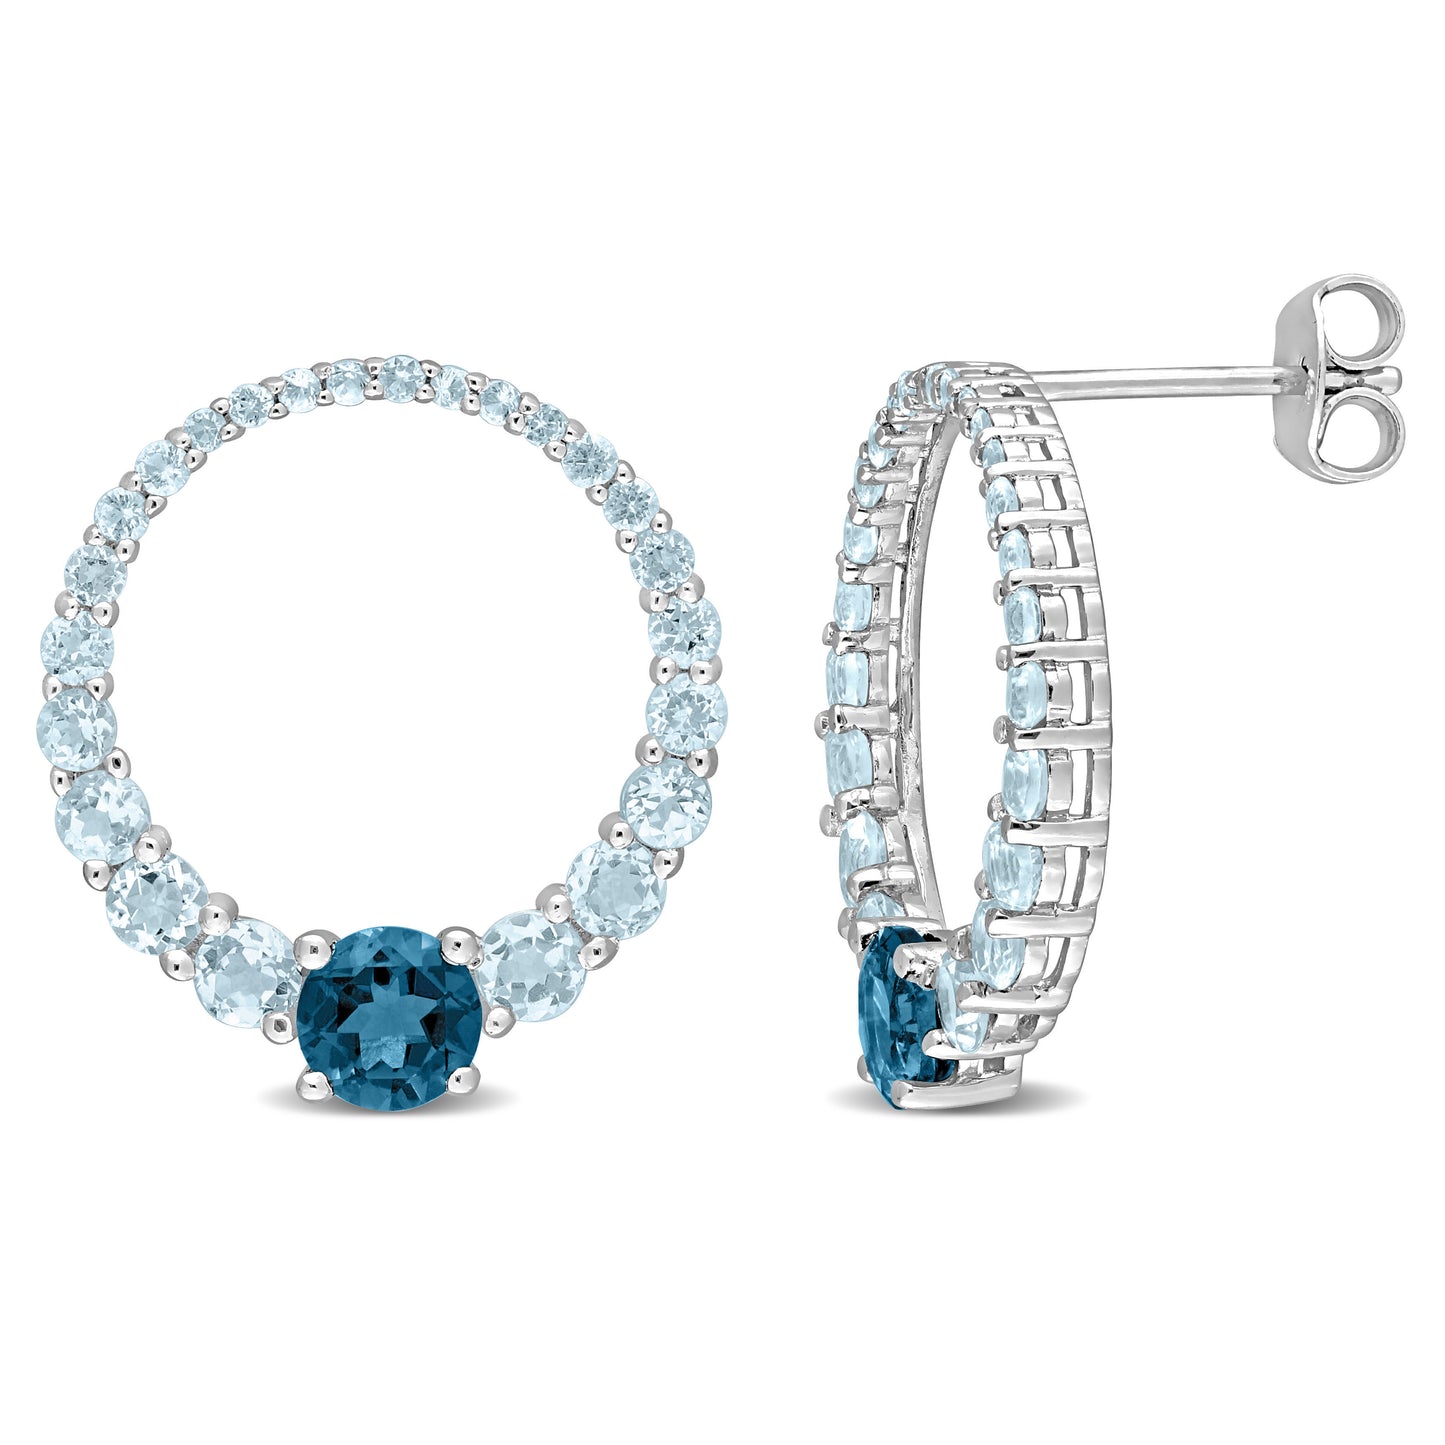 2 3/5ct Blue Topaz Circle Earrings in Sterling Silver